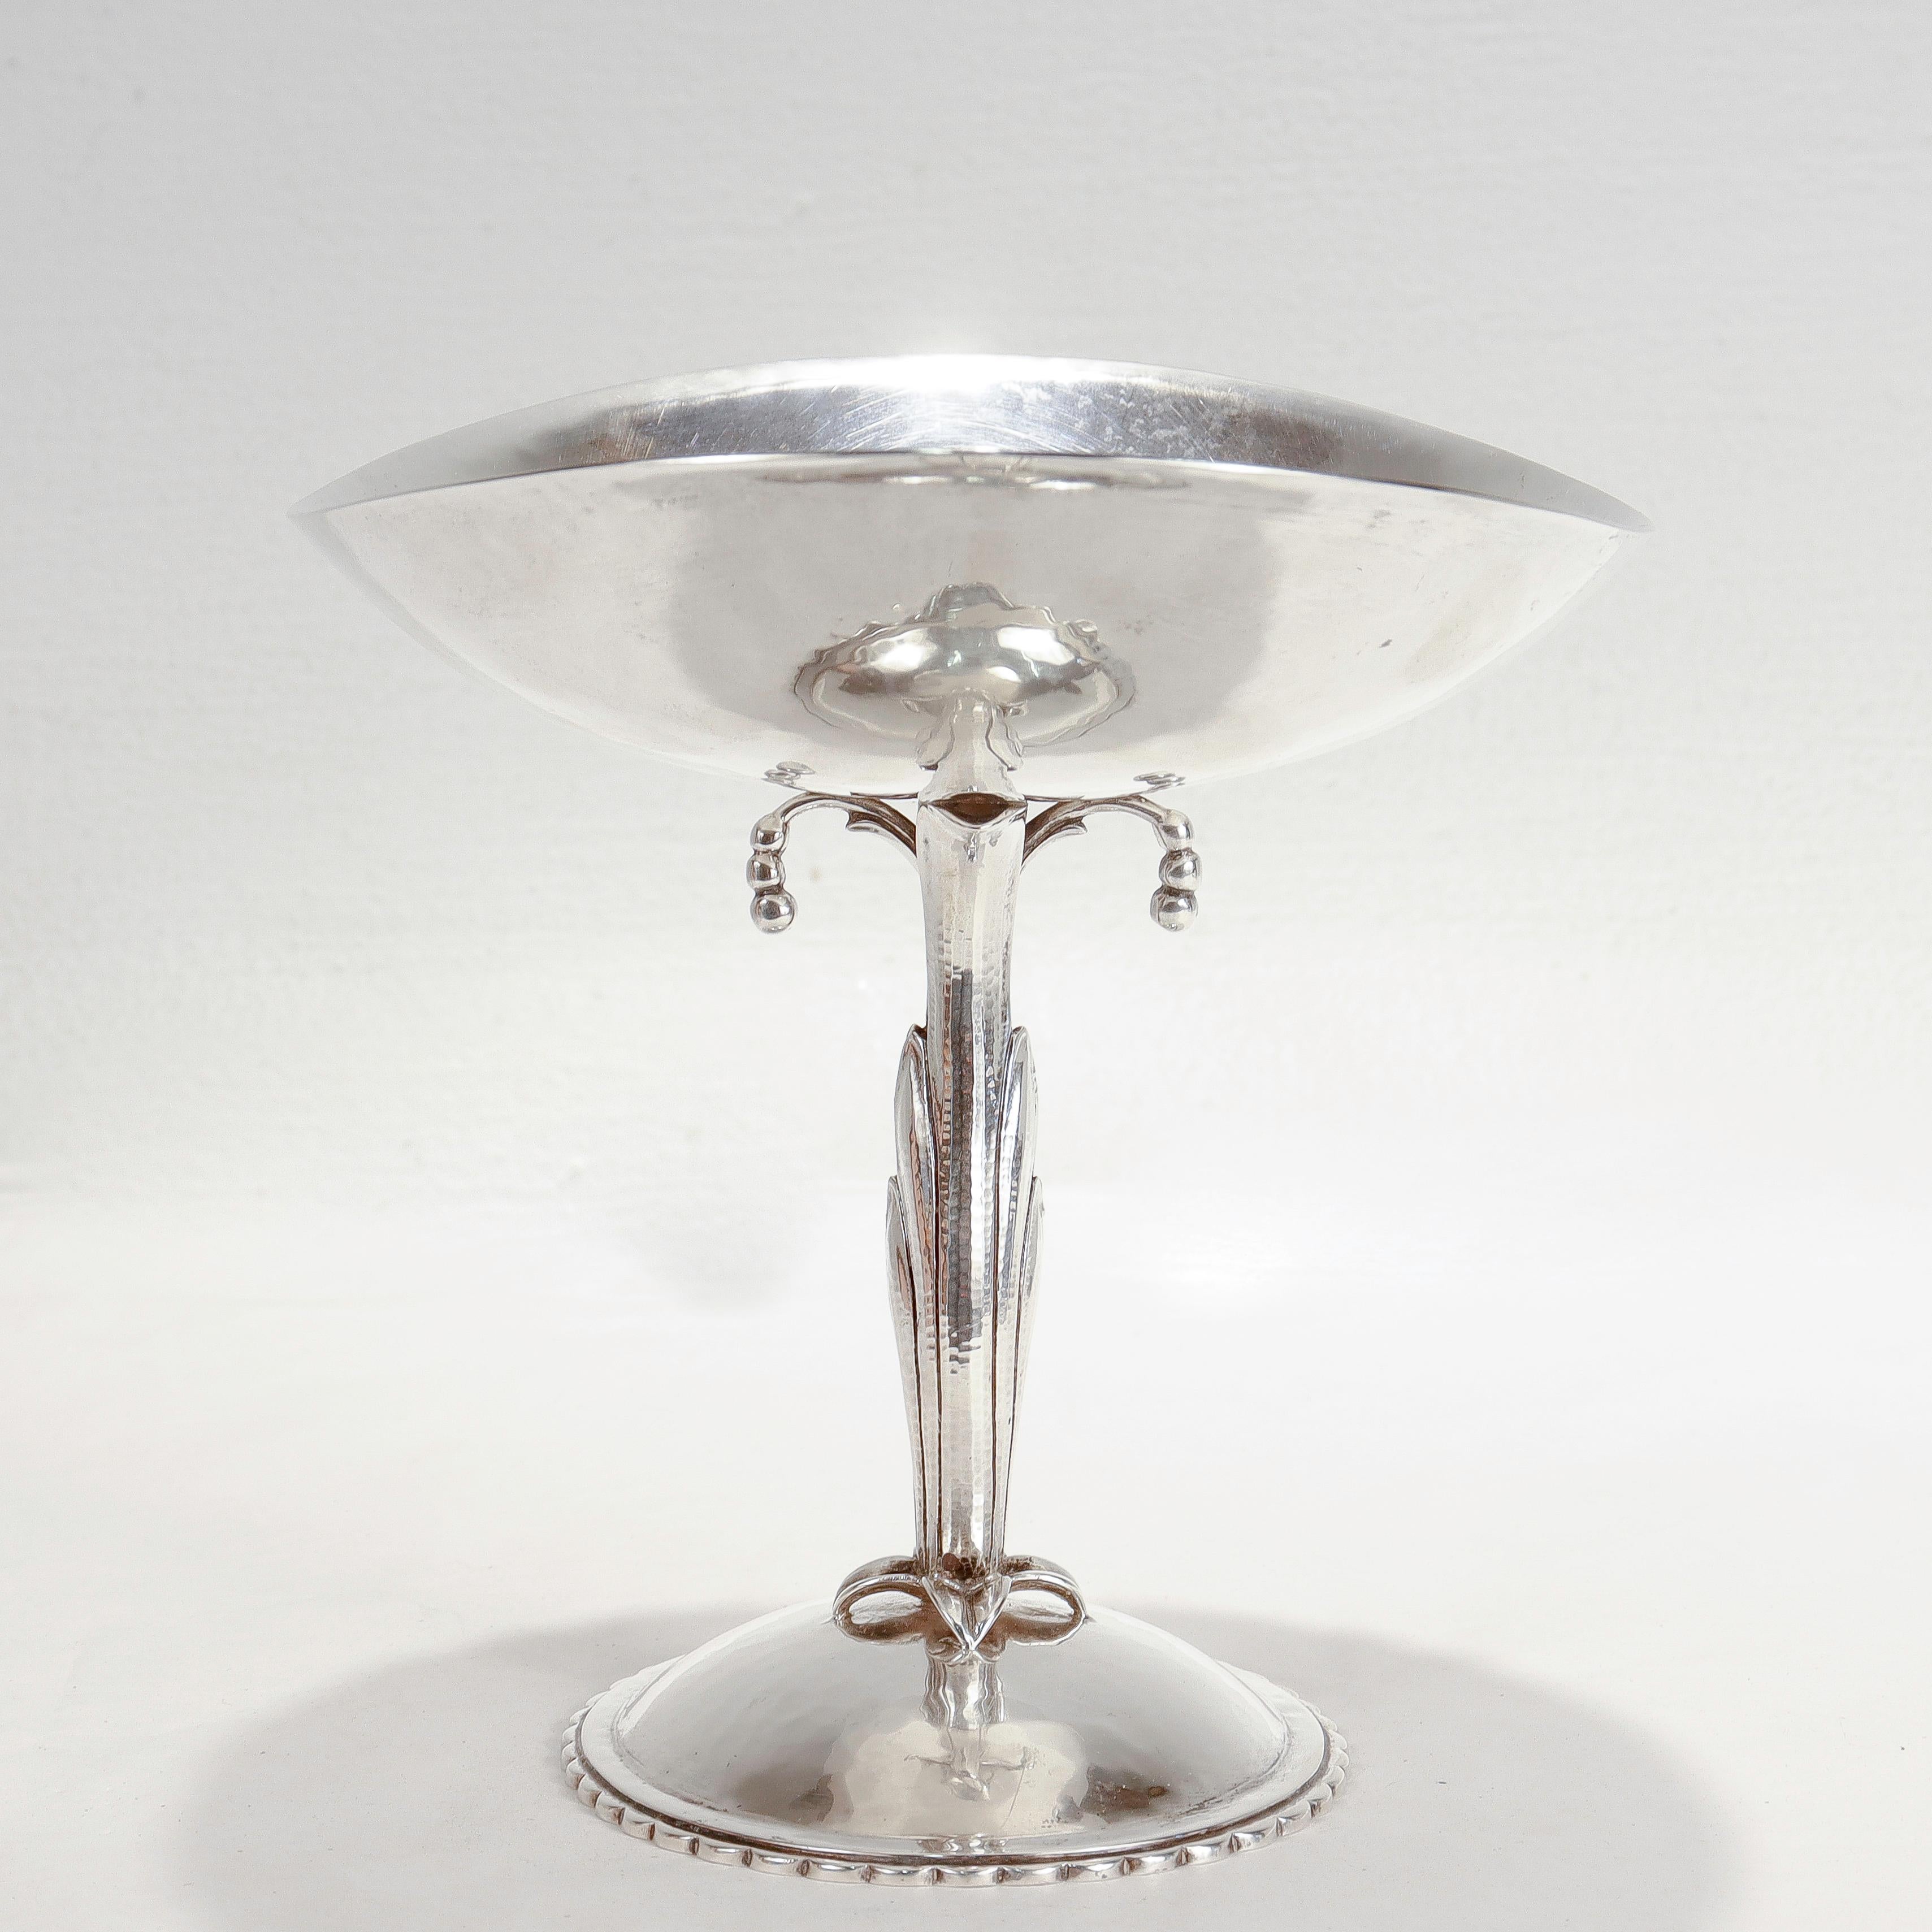 Women's or Men's Signed Chicago Arts & Crafts Hand-Hammered Compote or Tazza by Cellini Craft